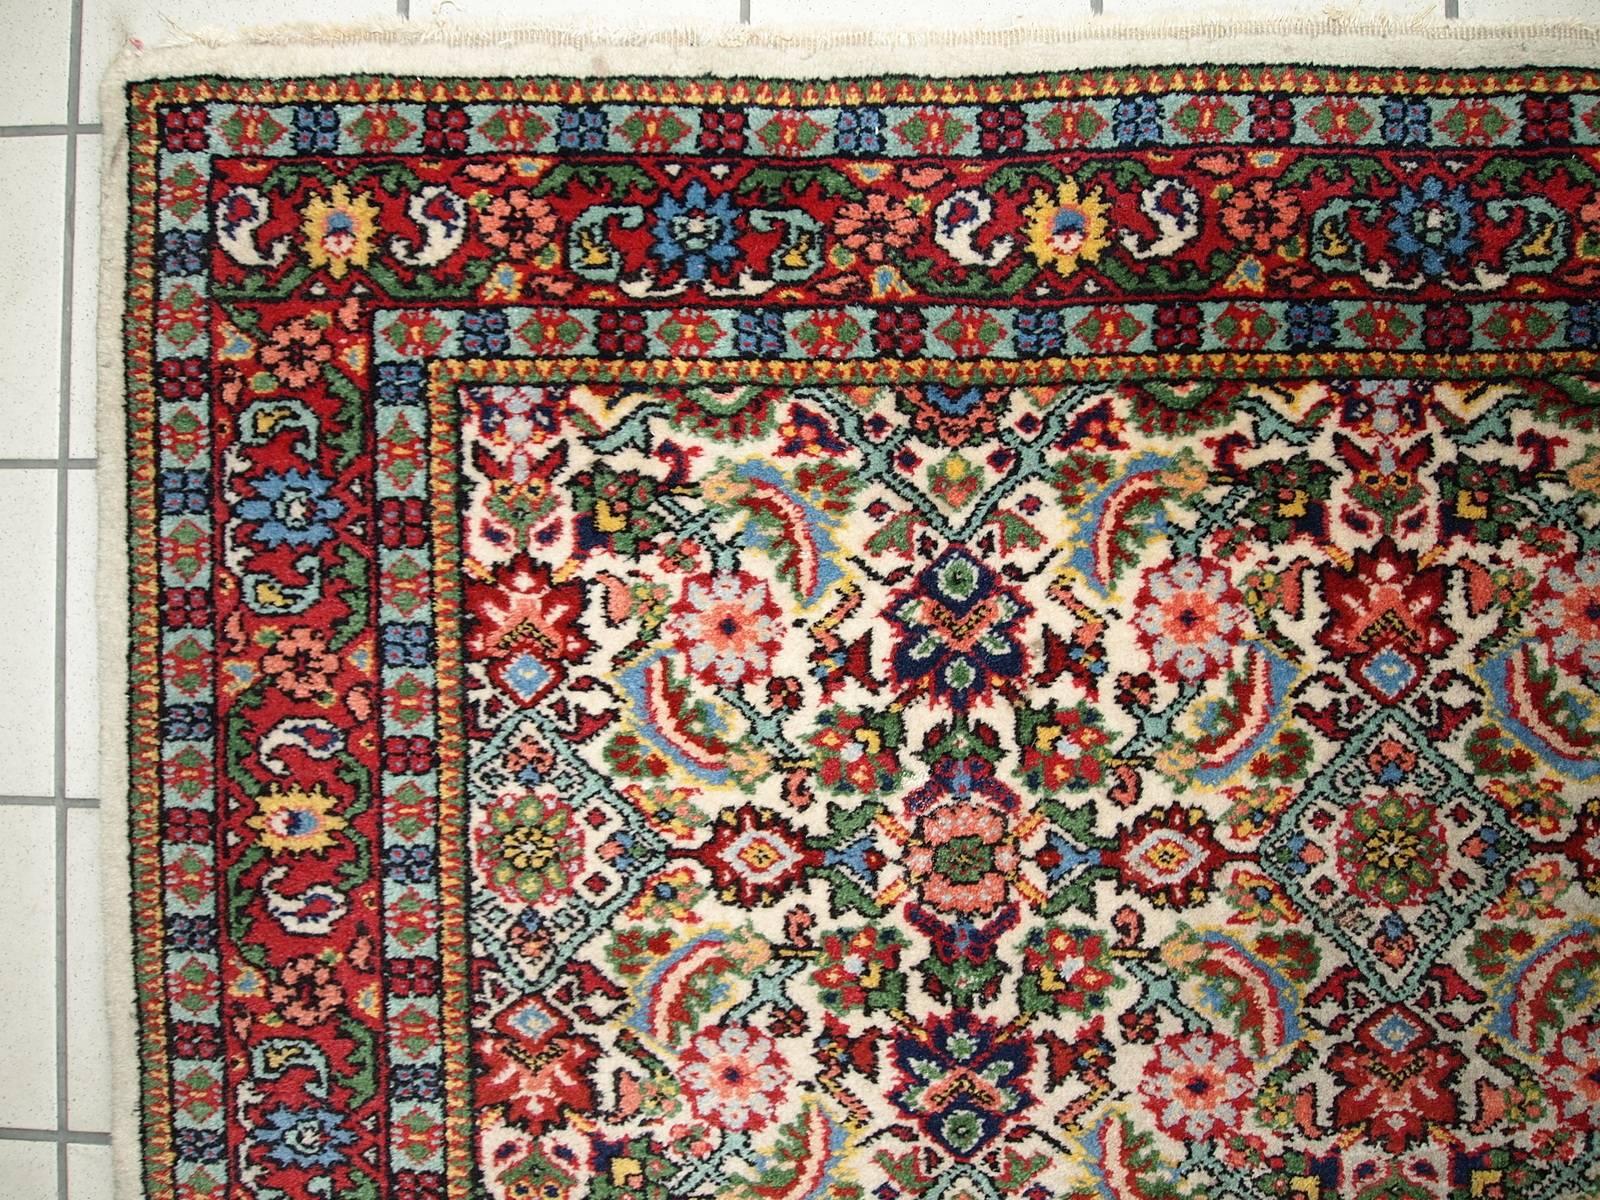 Antique Indo-Mahal rug in original condition. The name of this rug is Indo-Mahal because author reproduced Persian type of ruf Mahal in India. Design is Persian, but the rug was made in India. Beige background color with beautiful fish design mixed